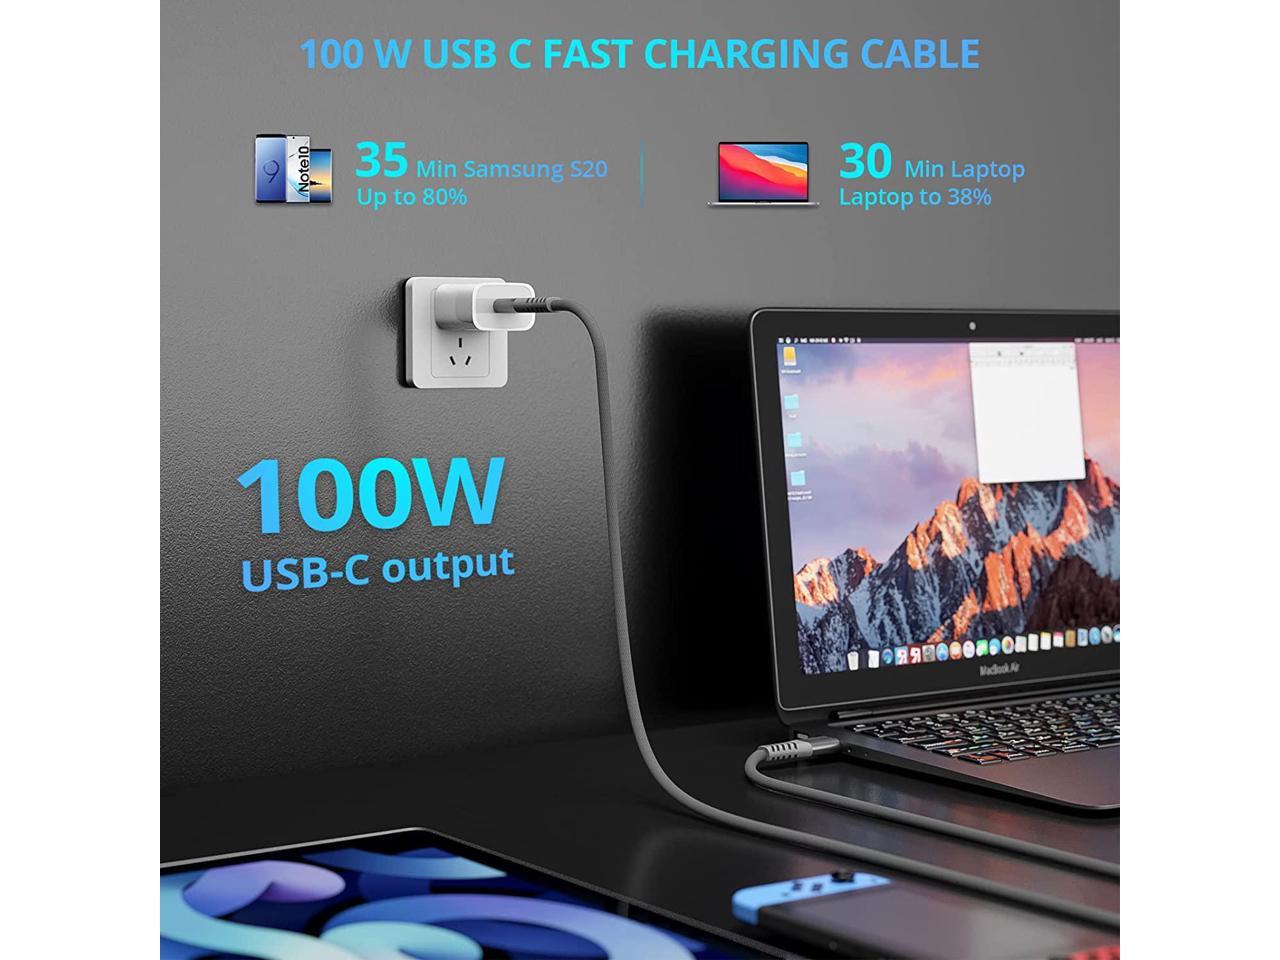 Galaxy -Grey iPad Pro 100W 5A PD QC Type C Fast Charging Cable Nylon Braided Type C Charging Cord Compatible with MacBook Pro iPad Air 4 USB C to USB C Cable 6.6 ft 2 Pack XYYZYZ 